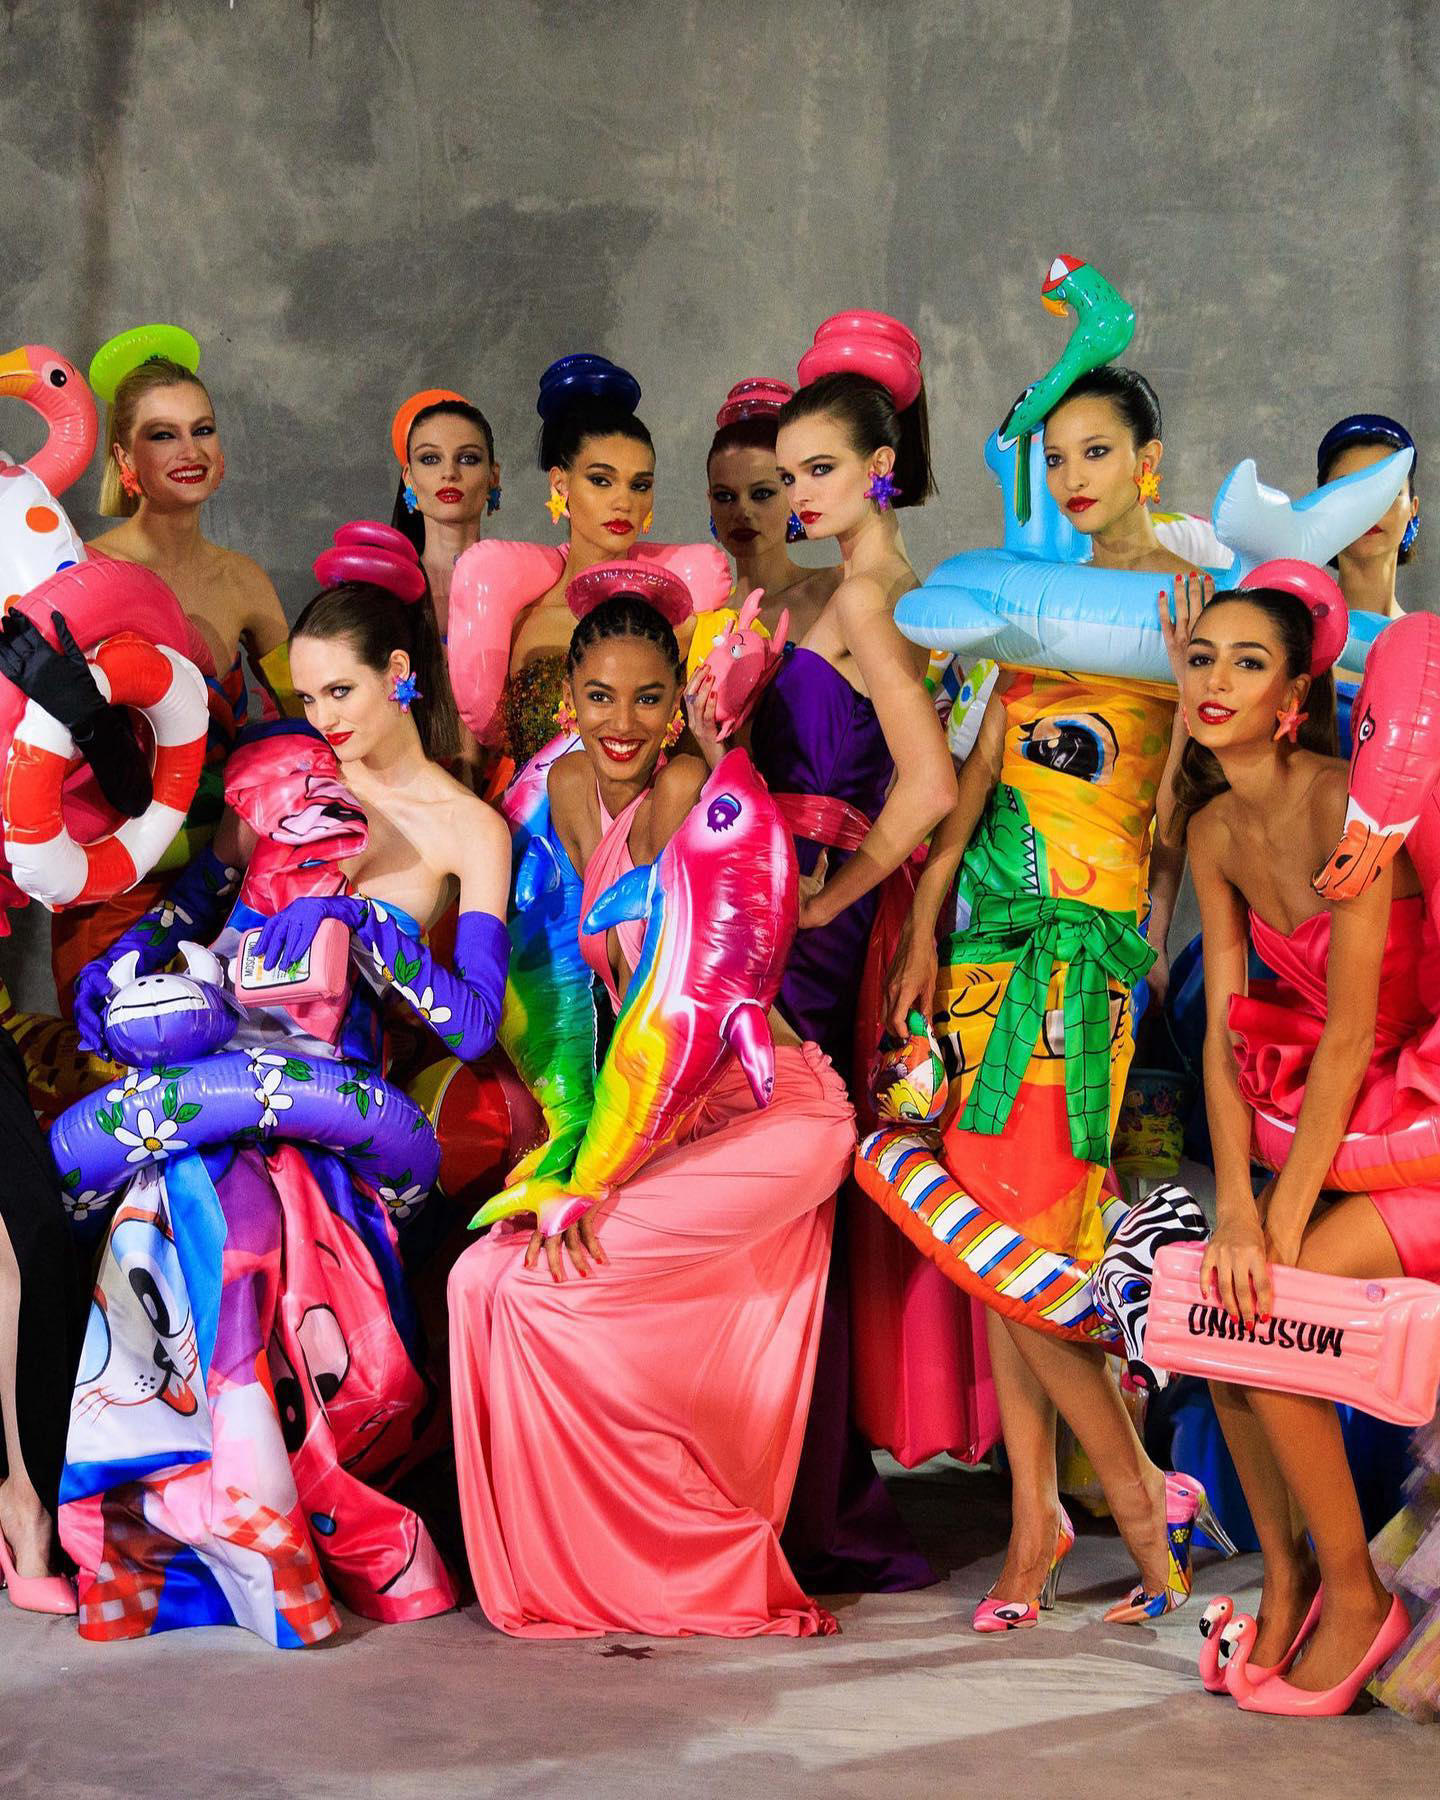 Vogue - Nobody embraces a theme like #jeremyscott, a fact he’s reinforced throughout his eight-year